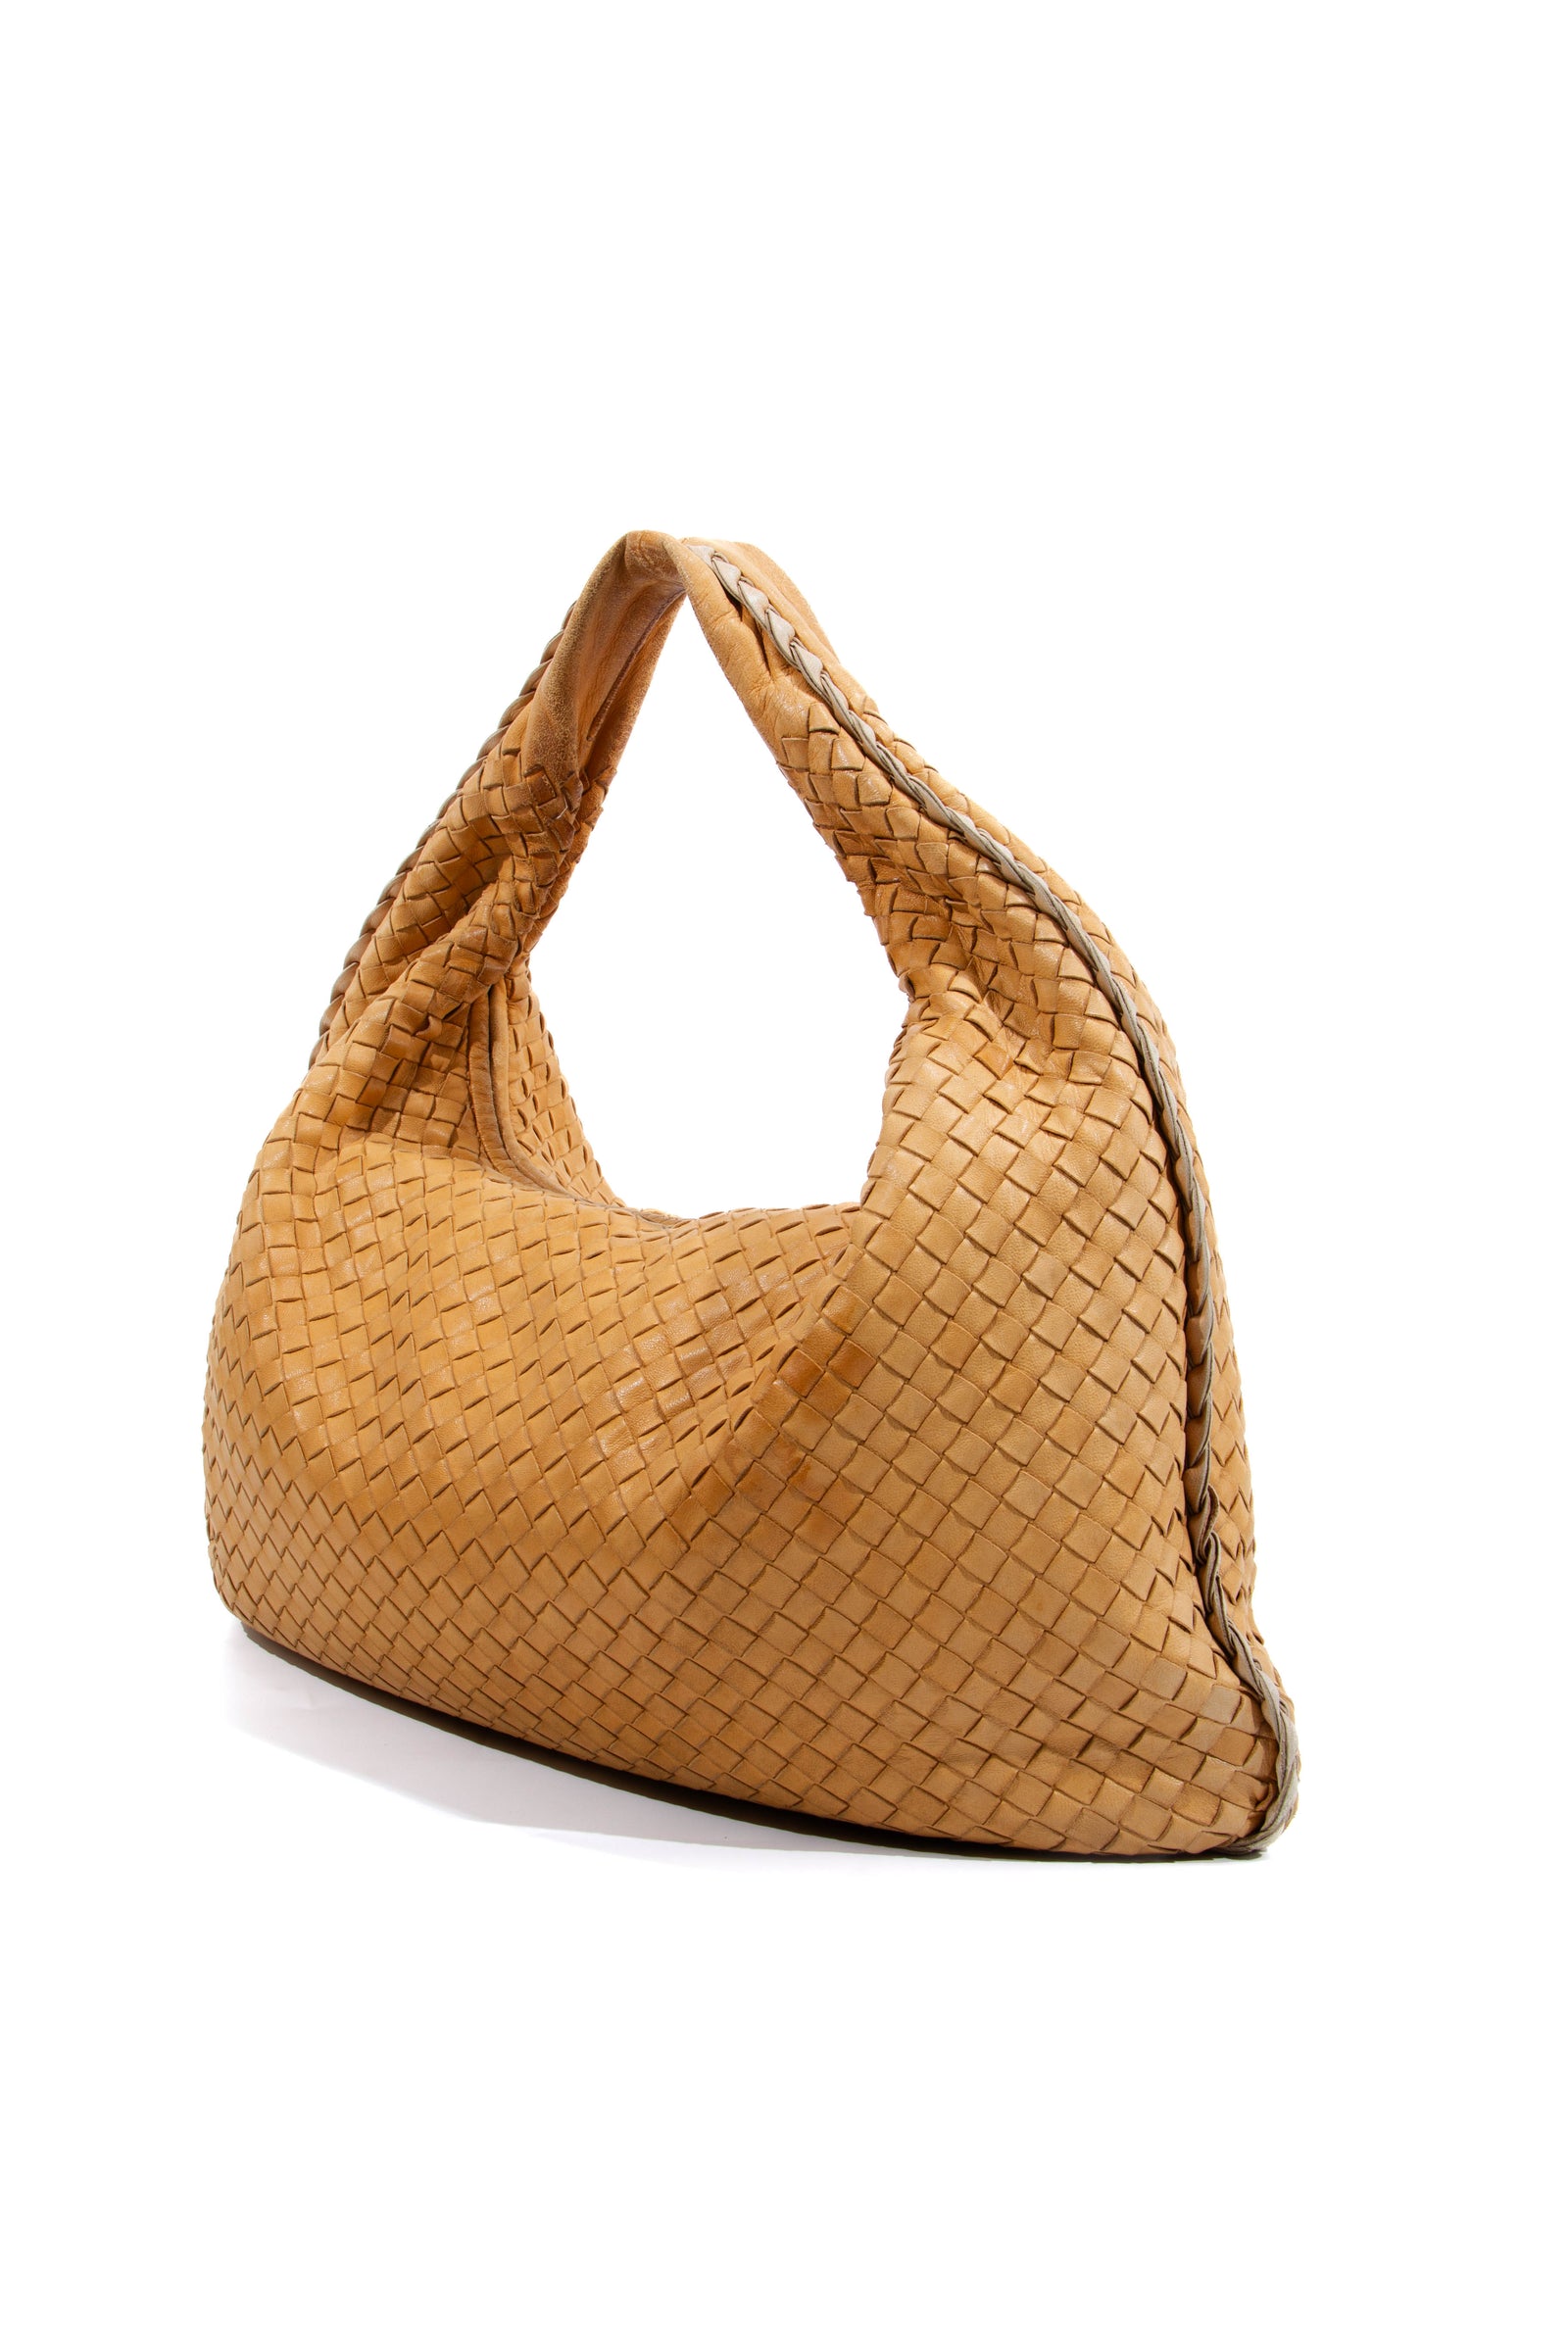 Chanel Tweed & Camel Quilted Aged Calfskin Medium Casual Style Hobo - Handbag | Pre-owned & Certified | used Second Hand | Unisex